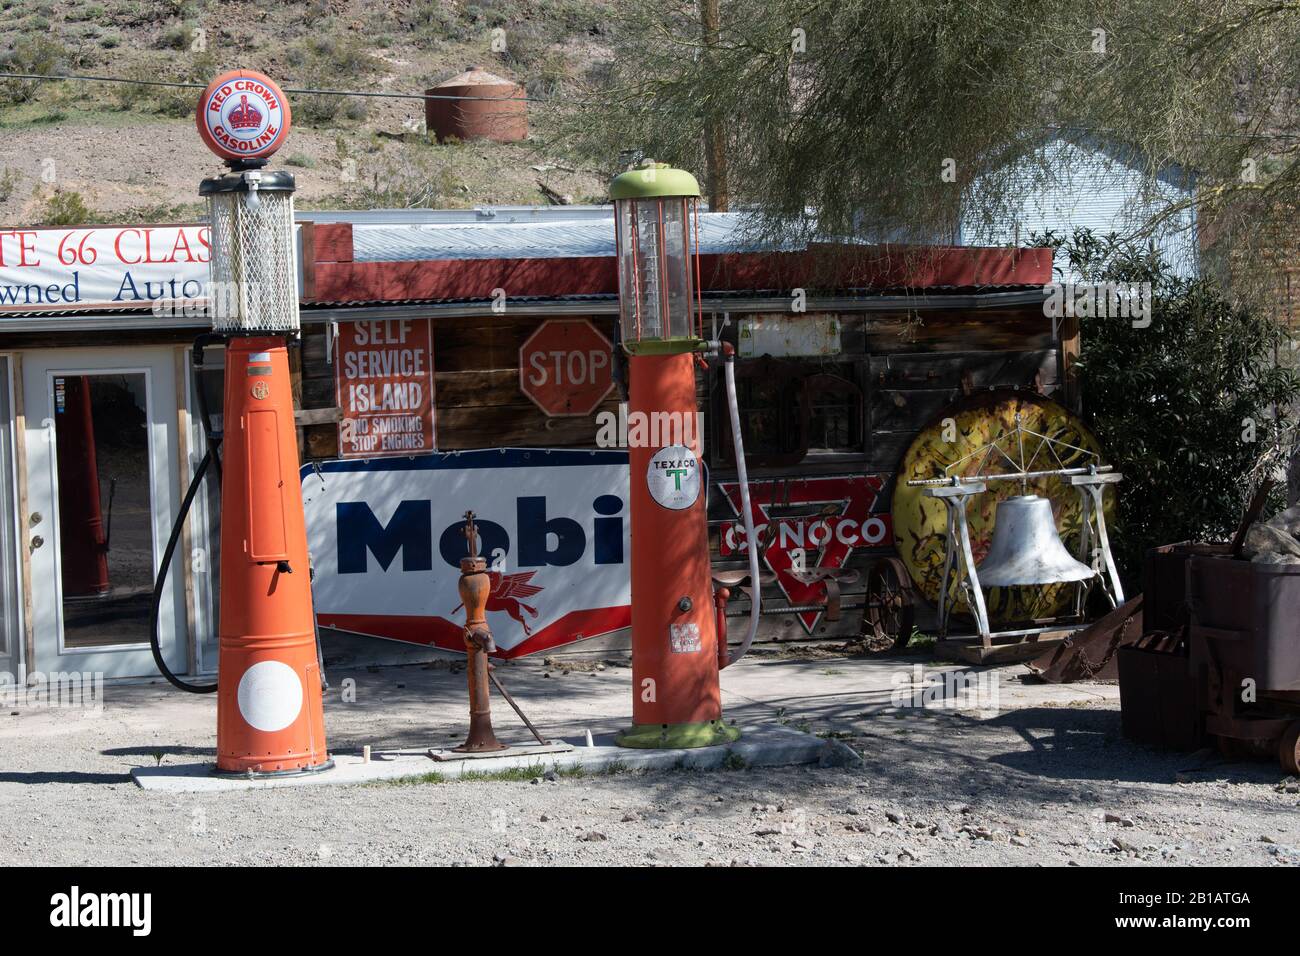 Antique store in Oatman Az, specializing in automotive related antiques Stock Photo